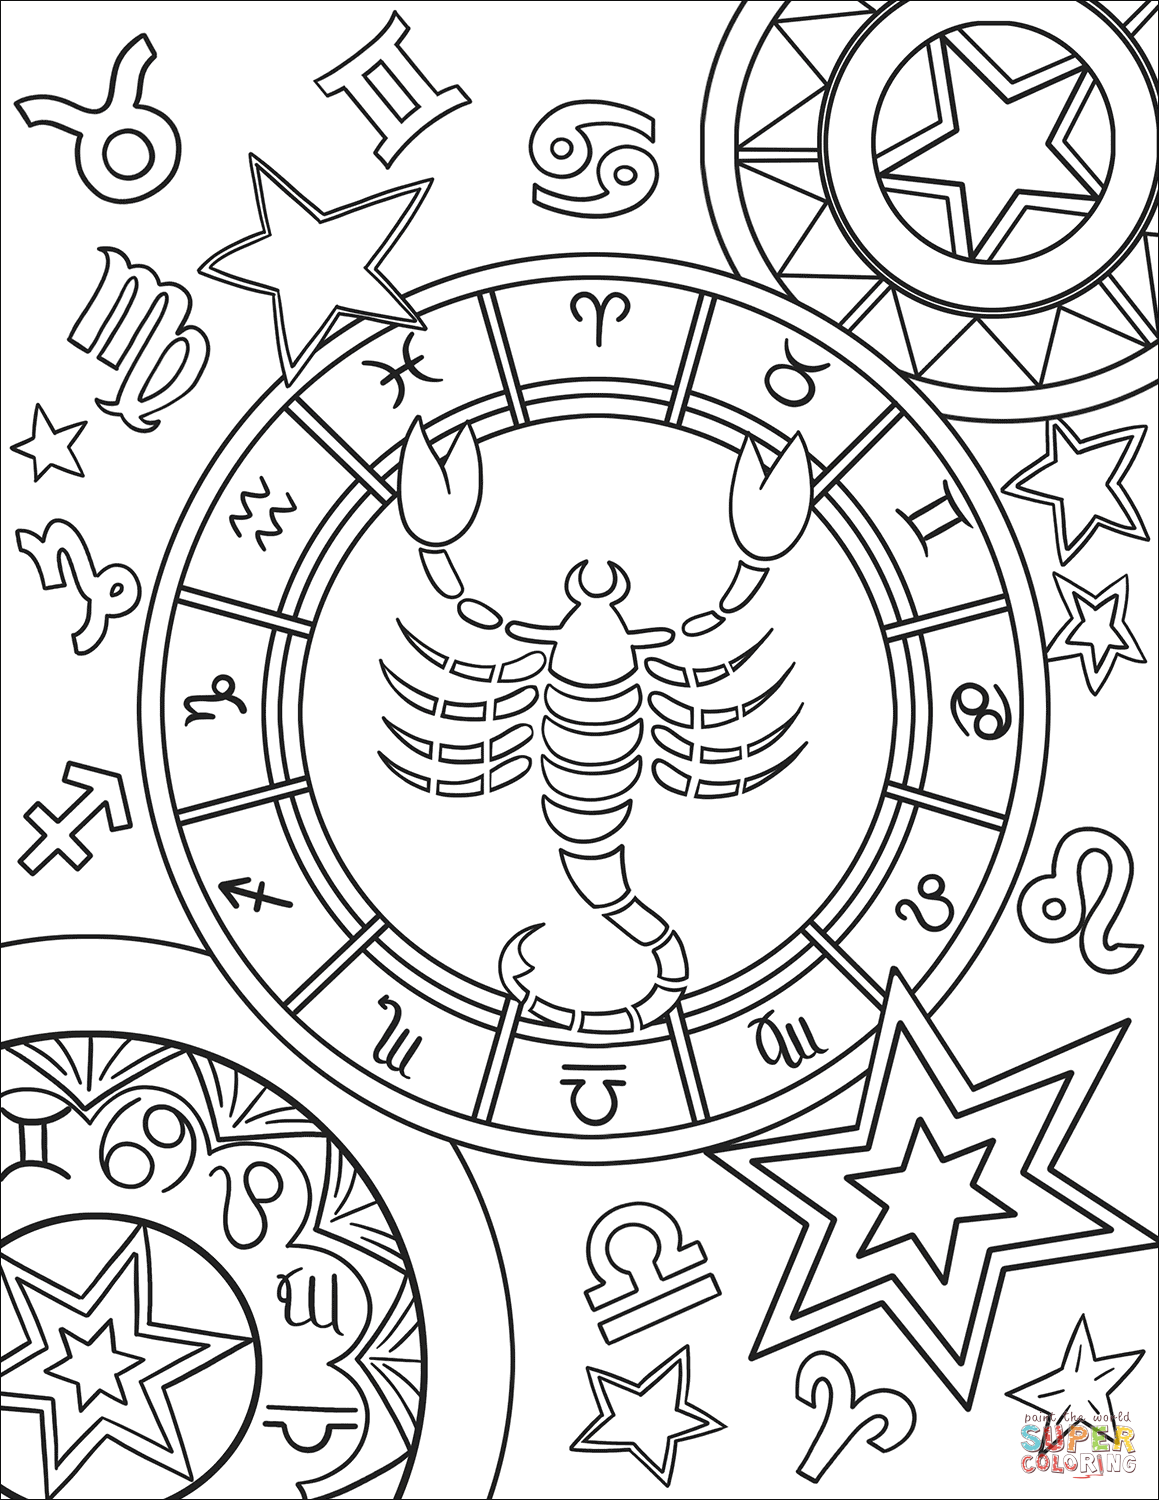 Scorpius Zodiac Sign Coloring Page Free Printable 